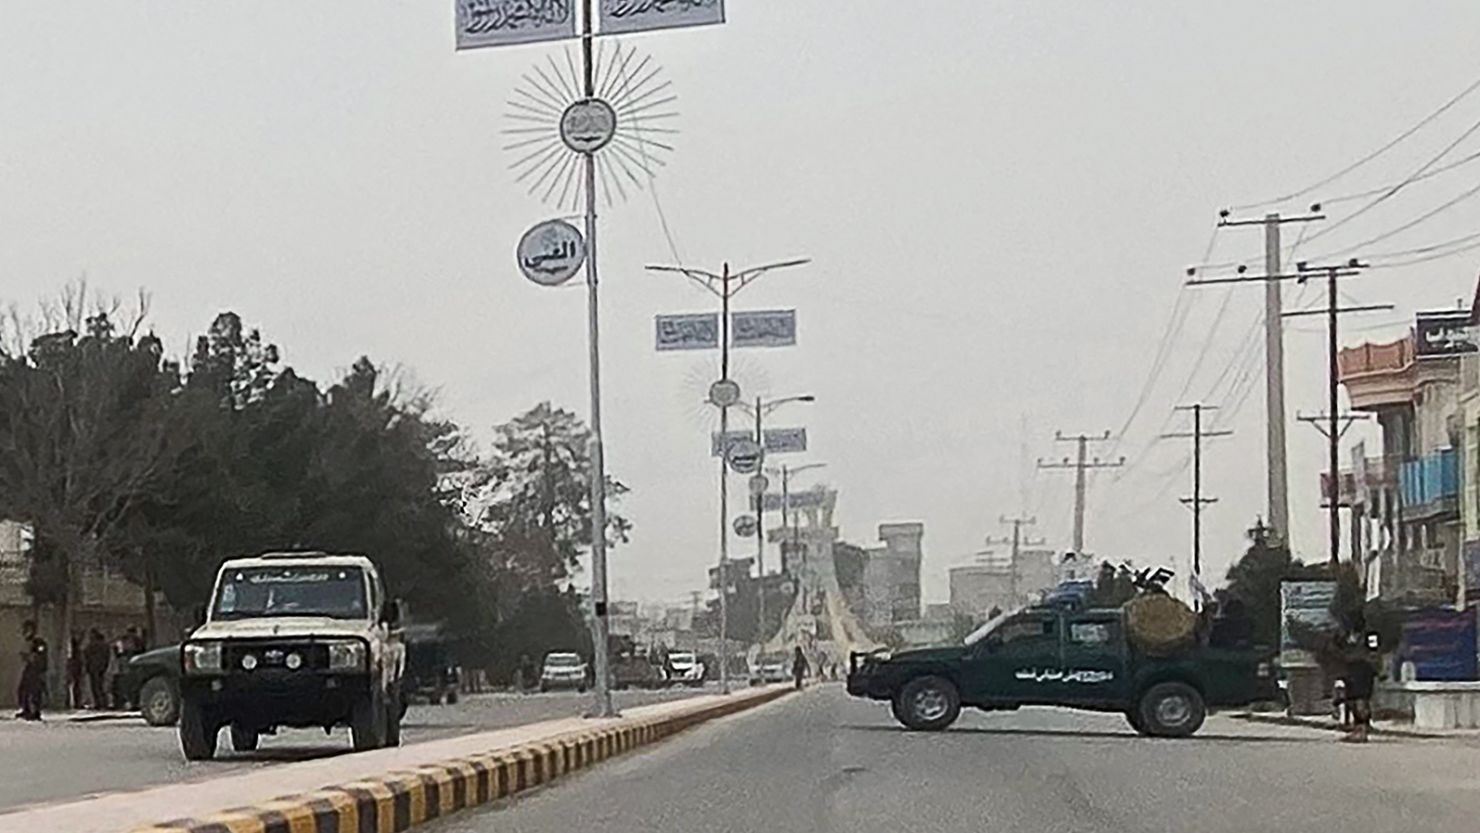 Taliban security personnel block a road in Mazar-i-Sharif, Balkh province, after a blast at the governor's office on March 9, 2023.